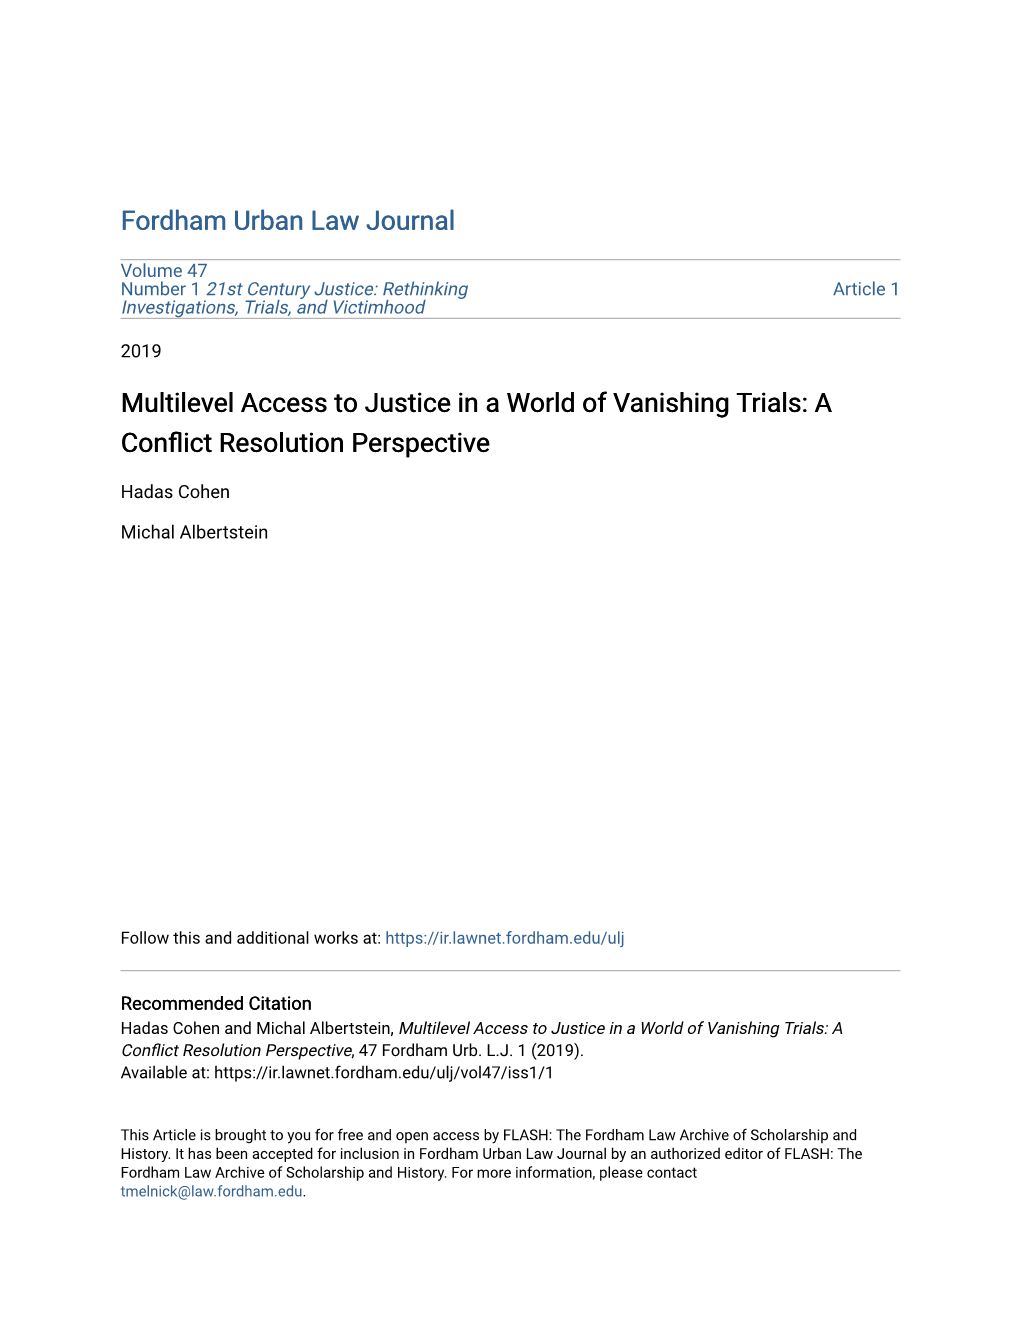 Multilevel Access to Justice in a World of Vanishing Trials: a Conflict Resolution Erspectivp E